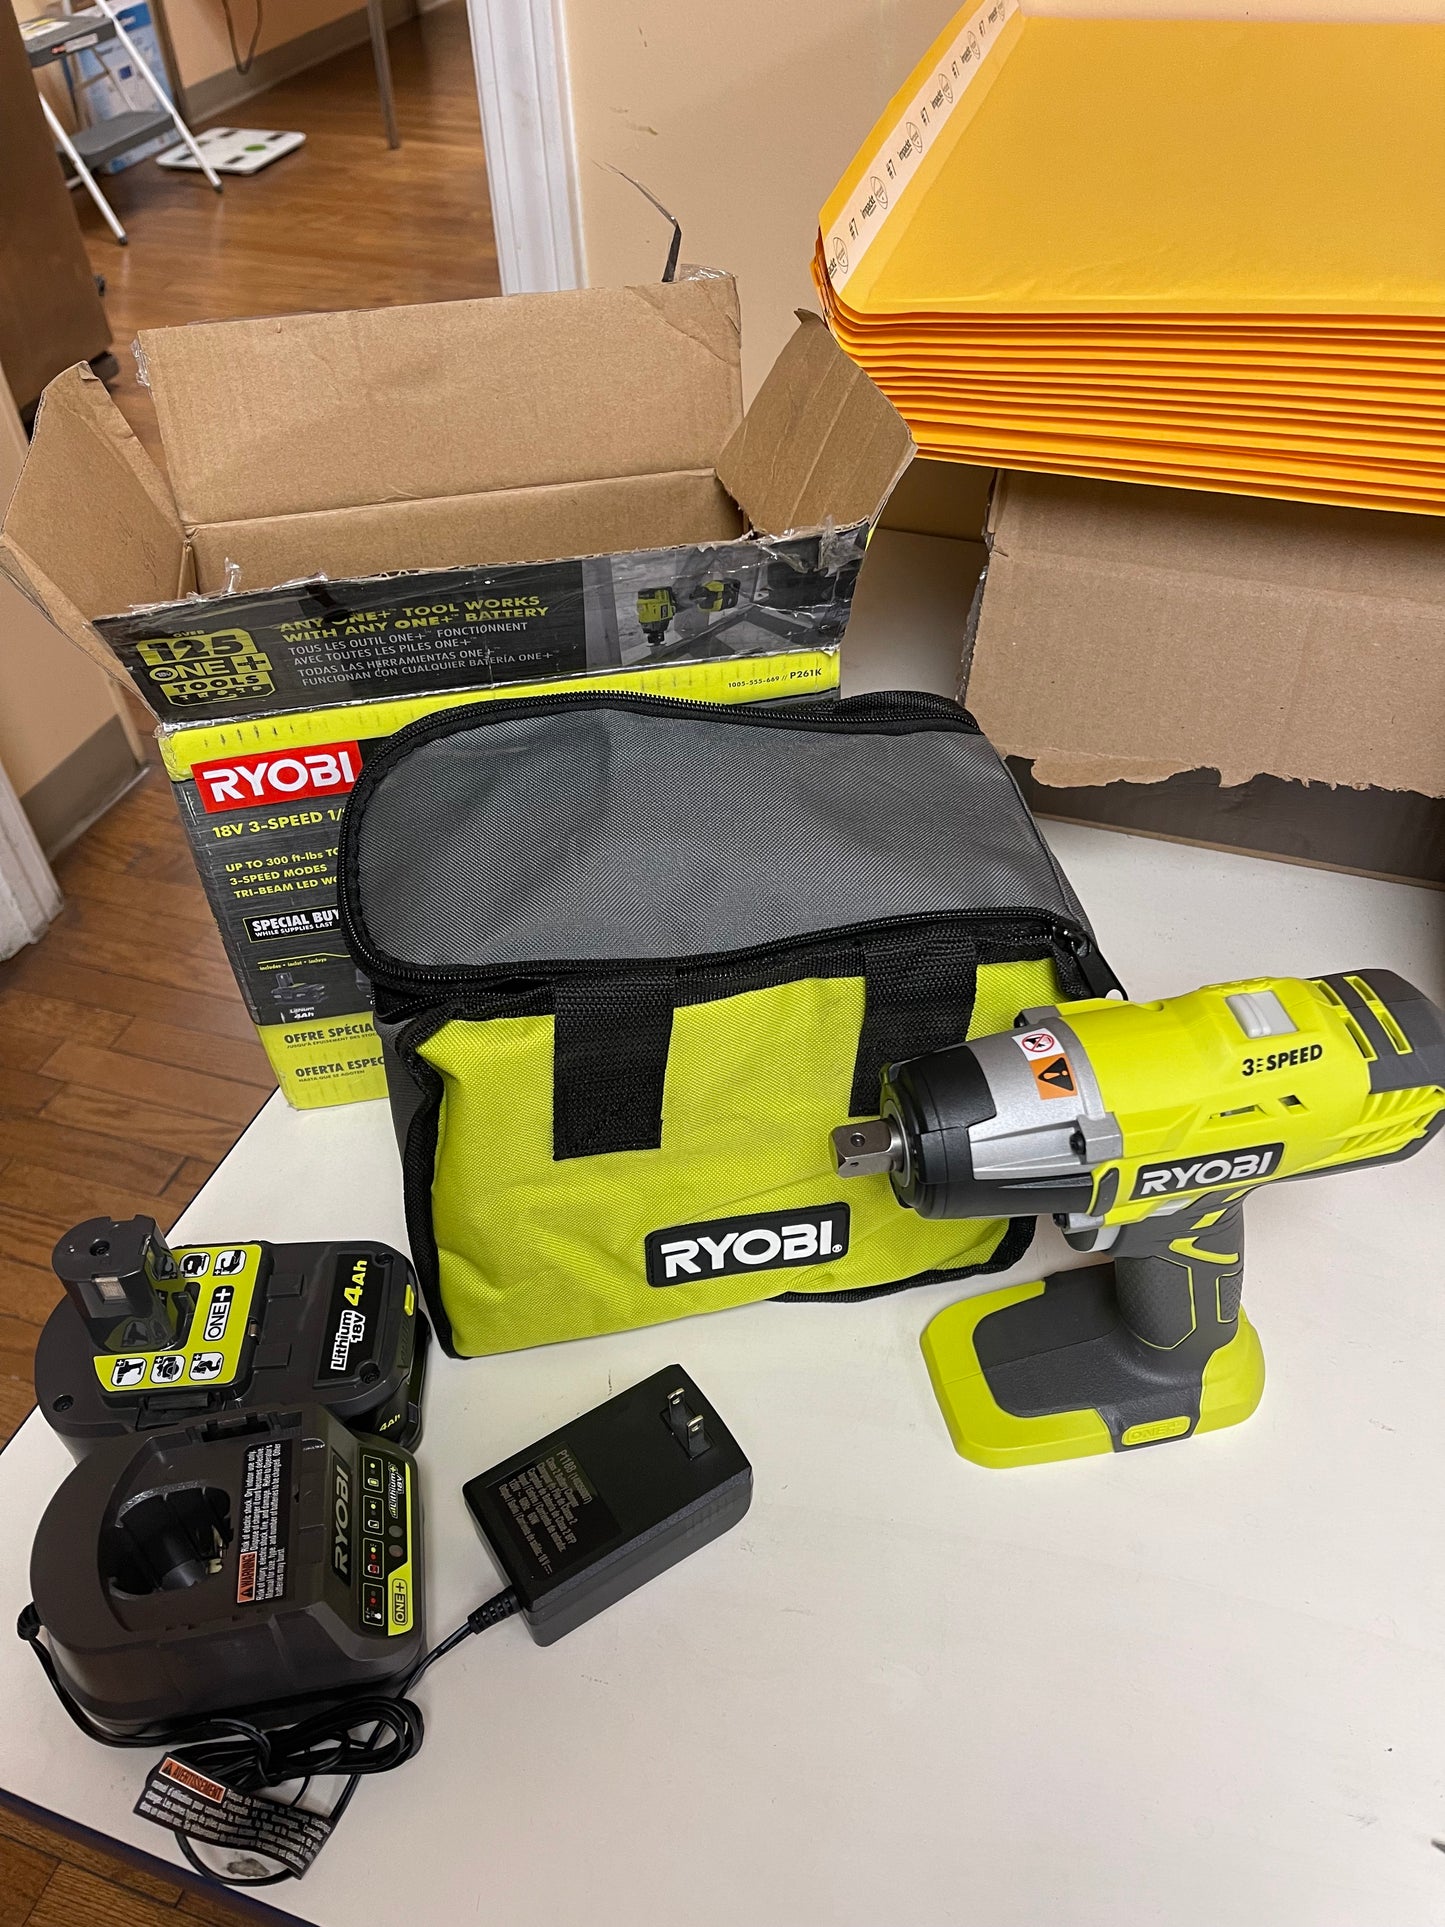 Ryobi 18V Cordless 3-Speed 1/2 in. Impact Wrench Kit with (1) 4 Ah Battery, Charger and Bag Damaged Box